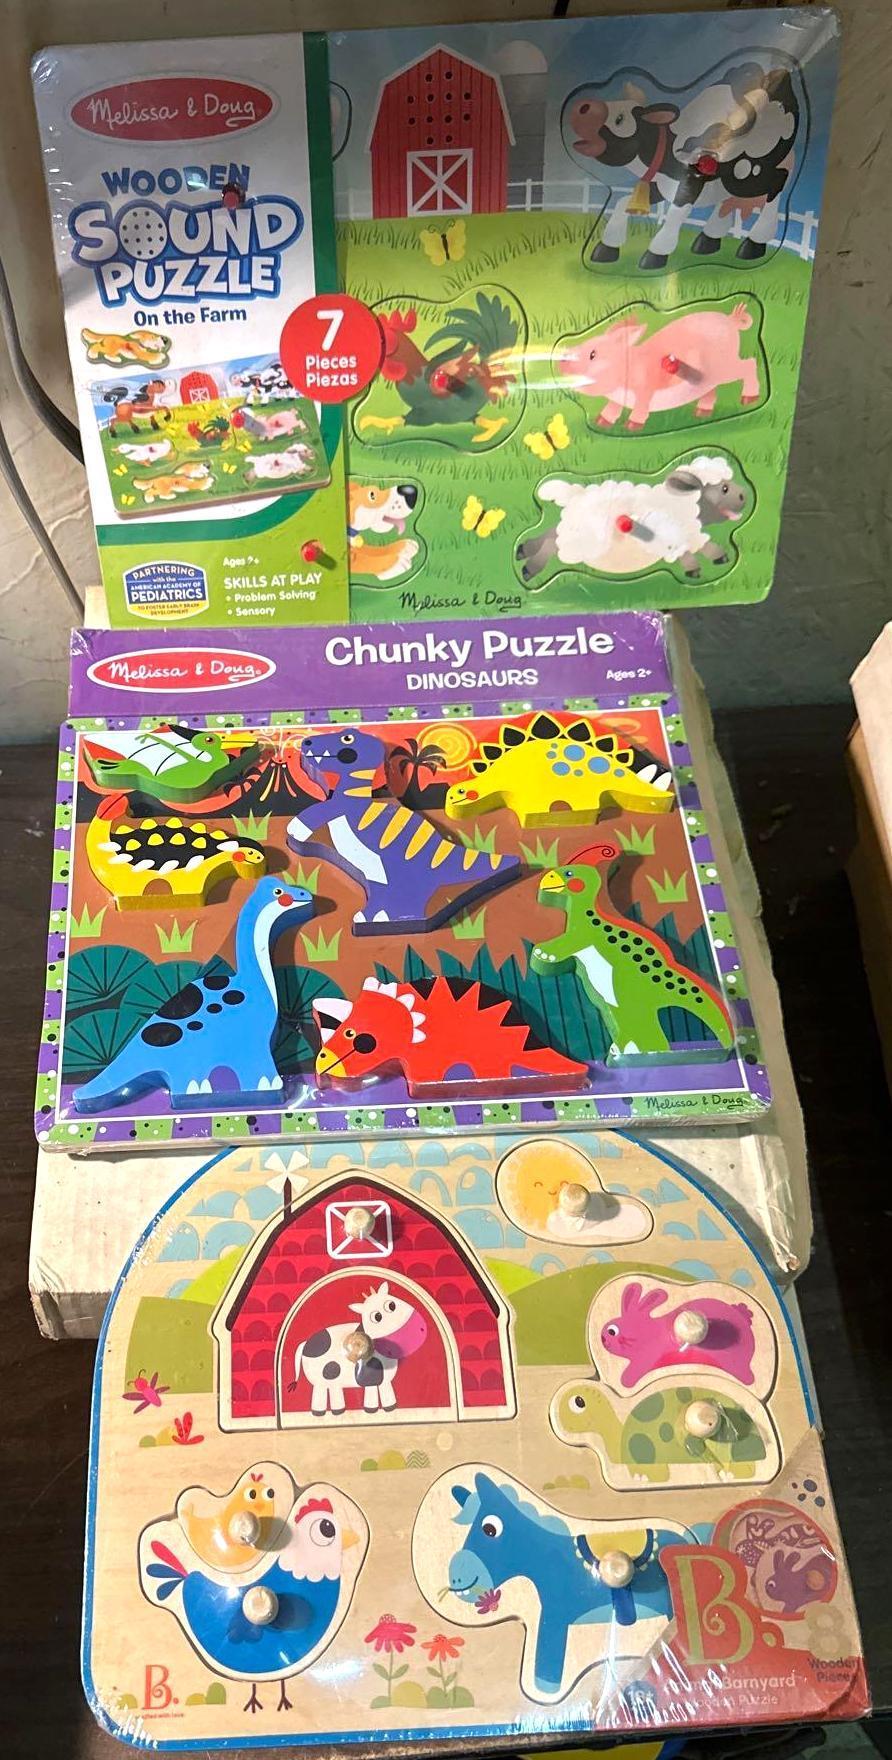 3 New Sealed Children's Wooden Puzzles